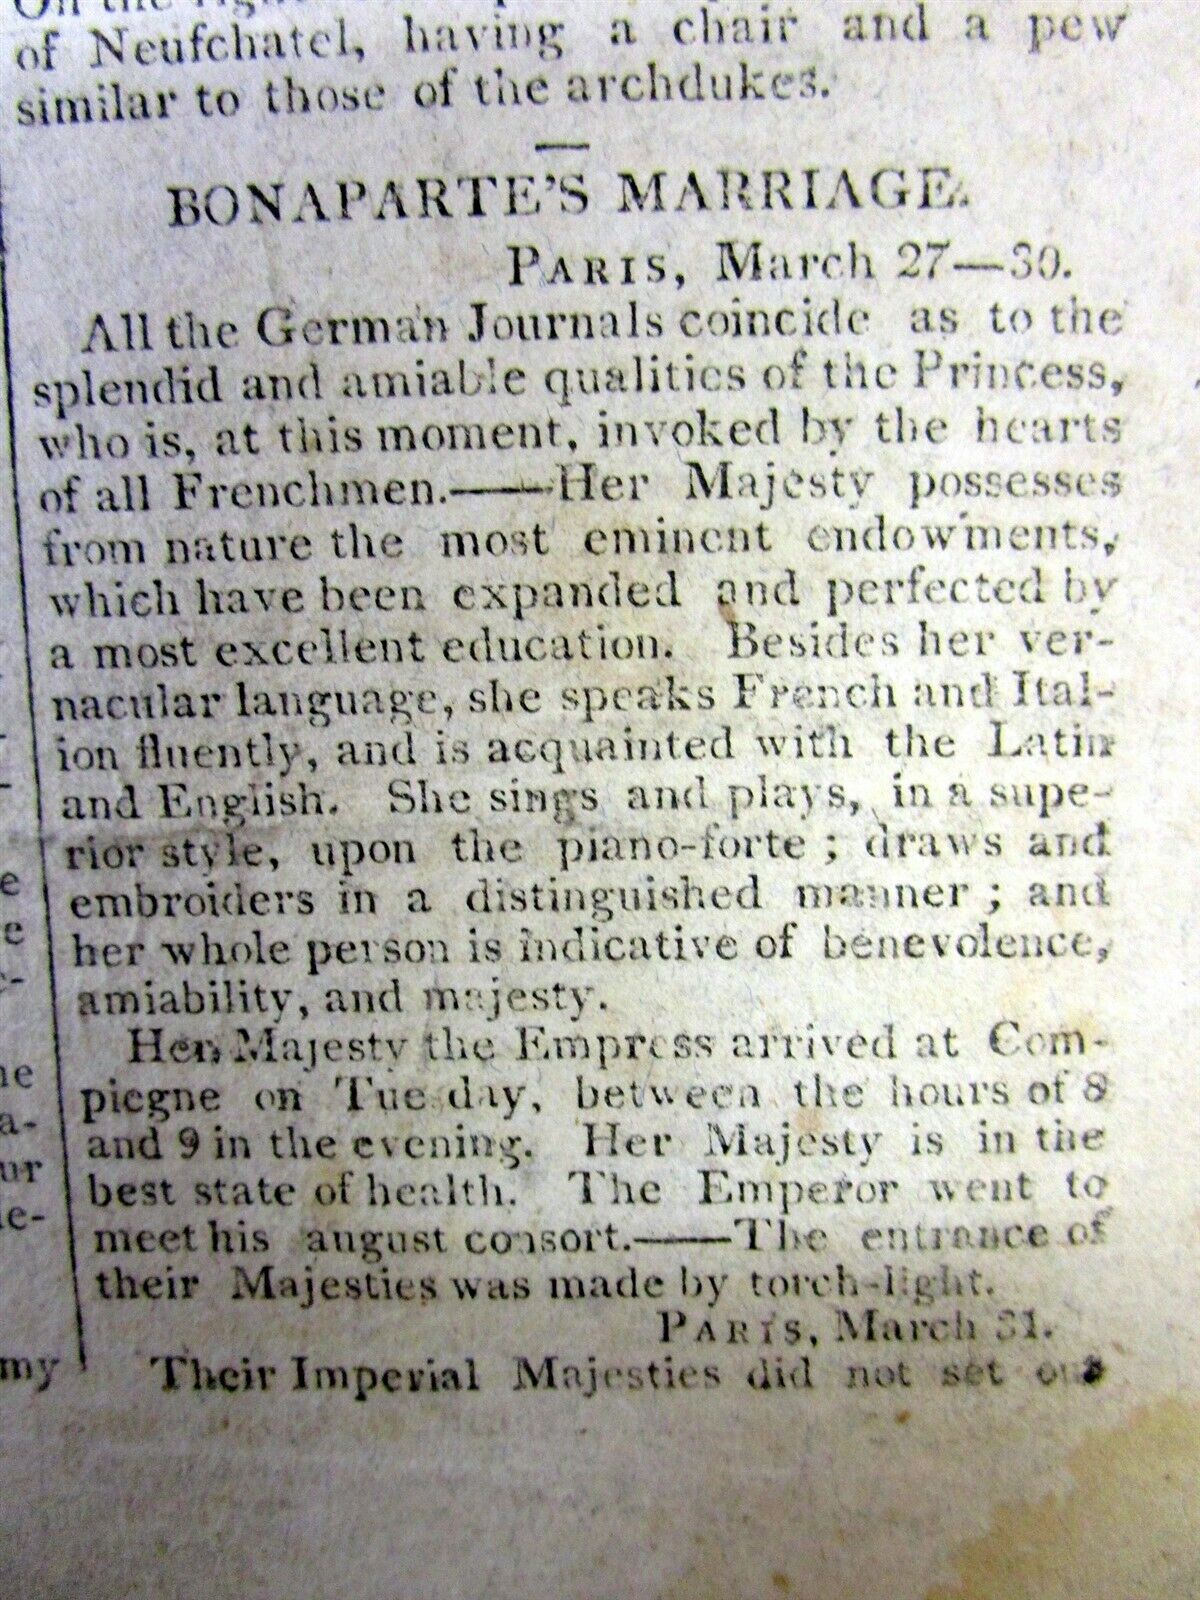 1810 newspaper with the MARRIAGE of NAPOLEON BONAPARTE  to MARIE LOUISE